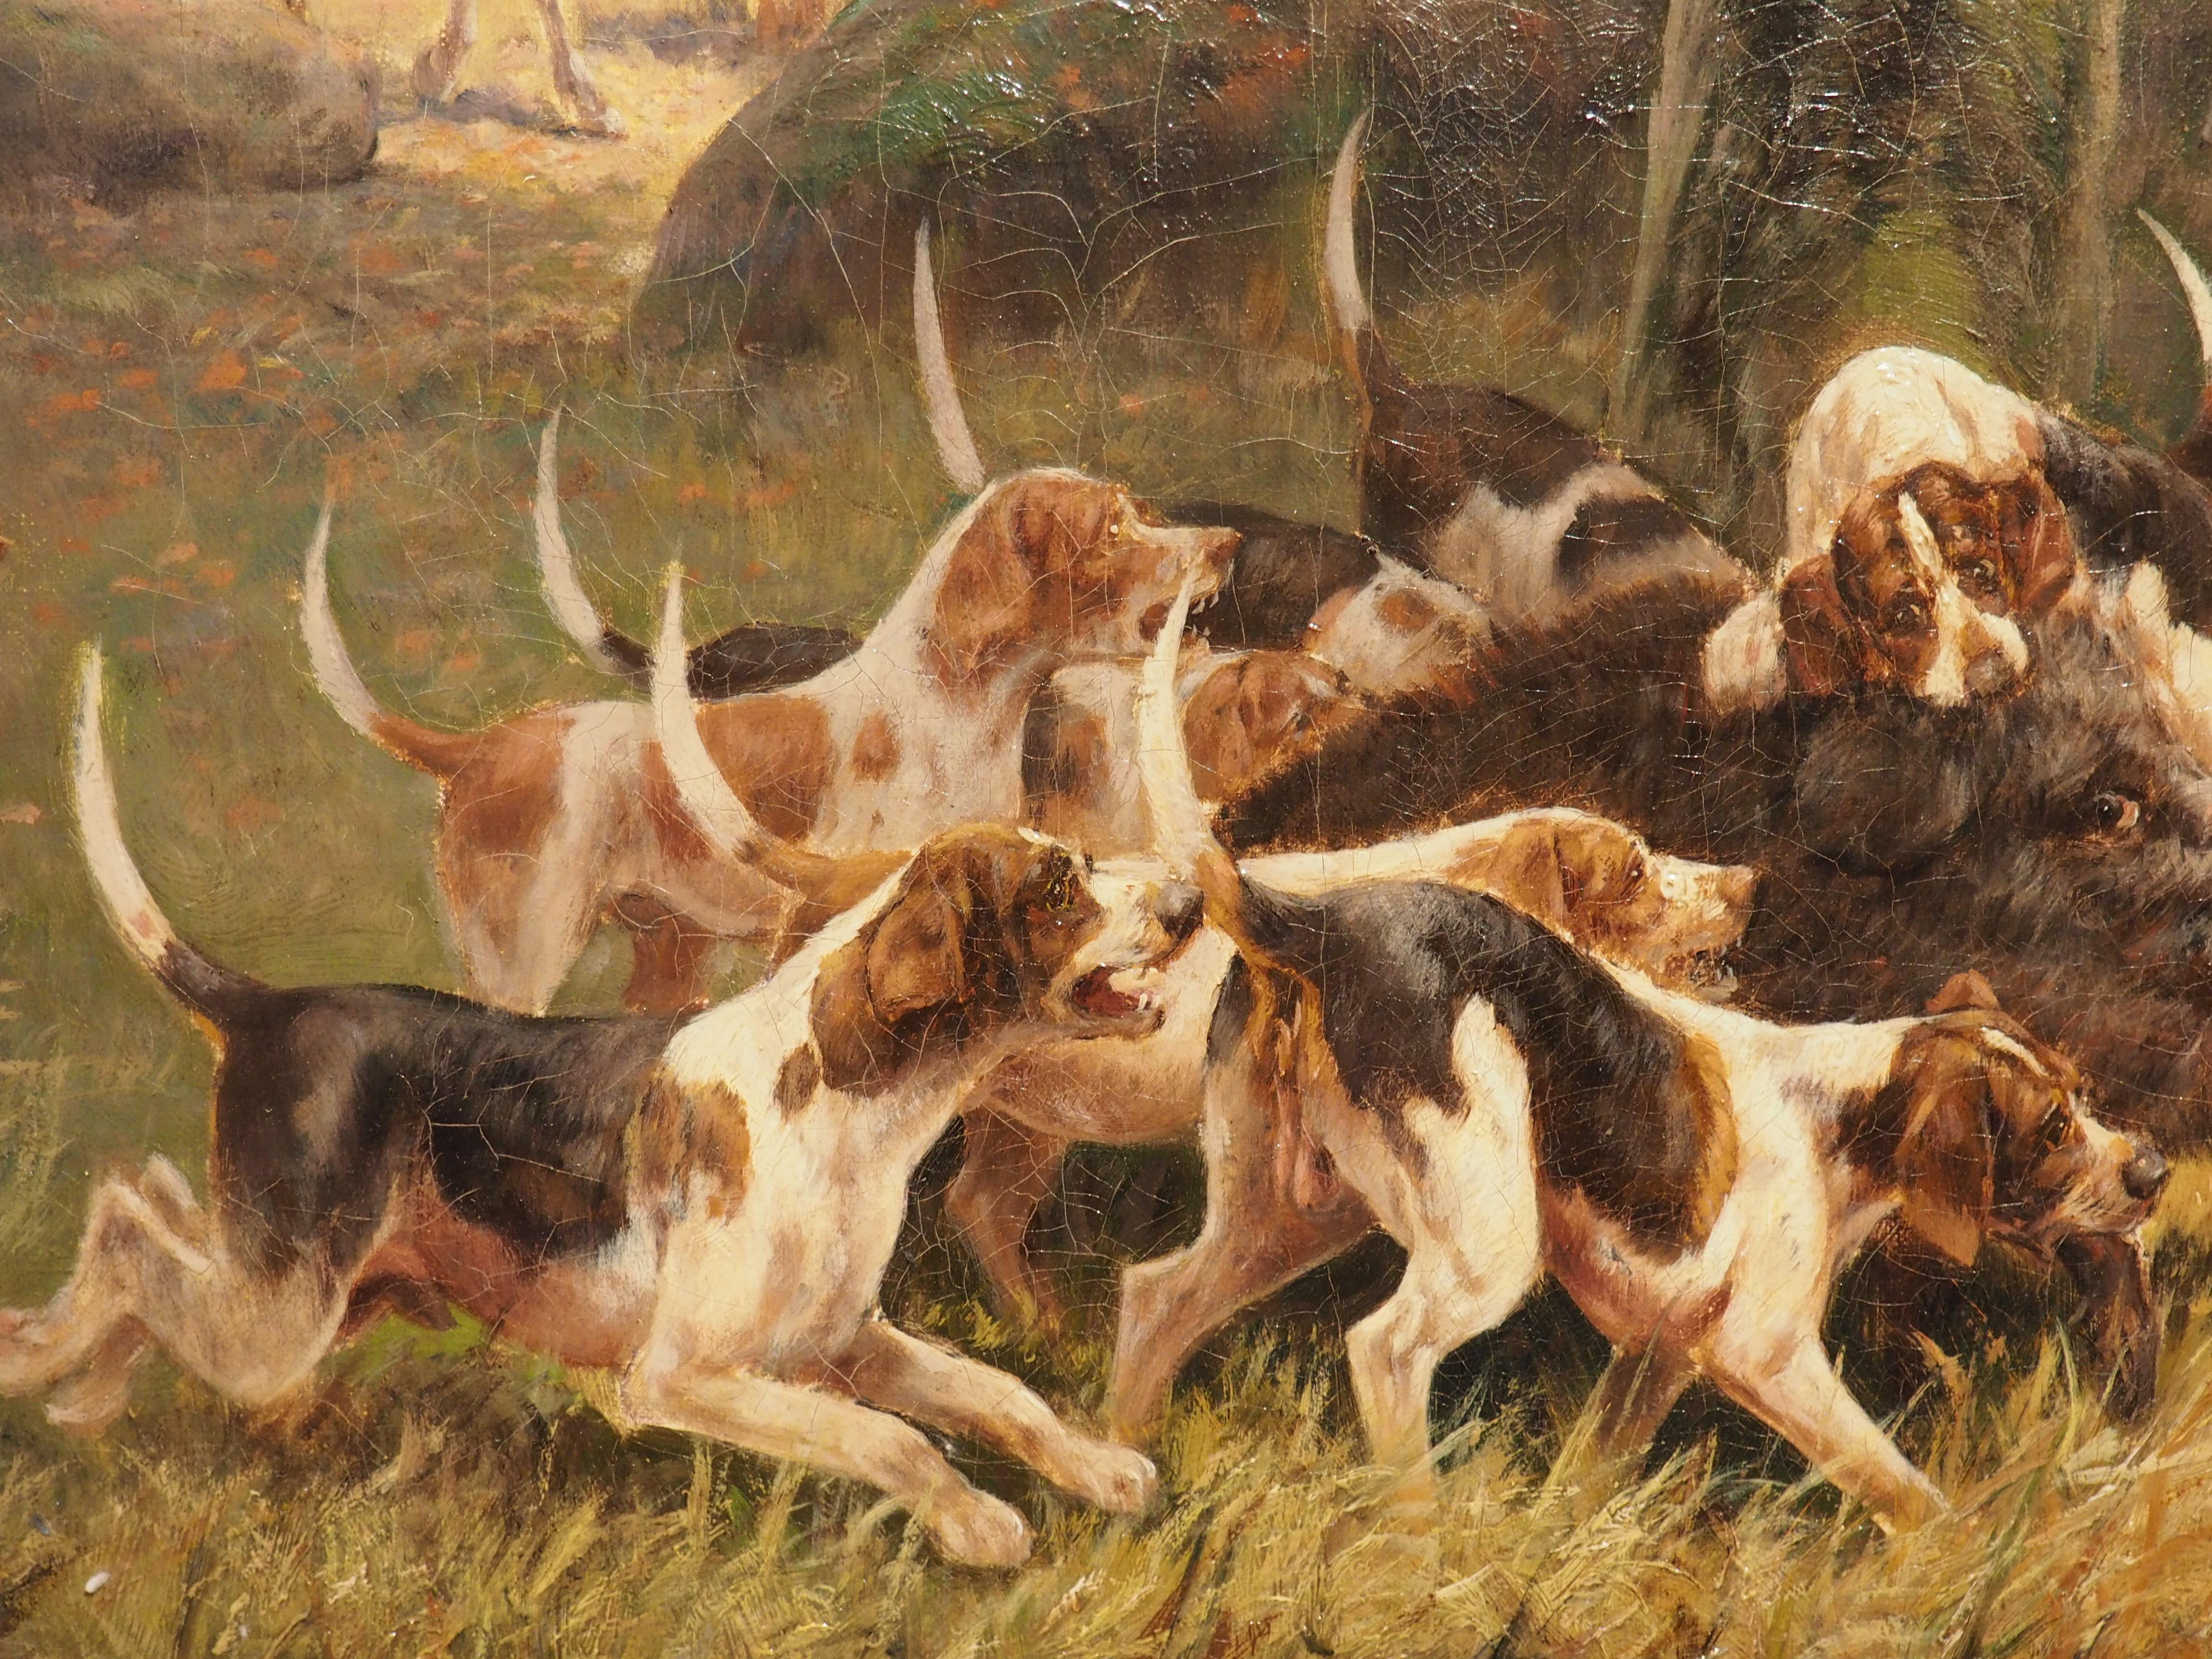 Antique French Oil Painting of a Boar Hunt, Signed E. Petit (1839-1886) 1